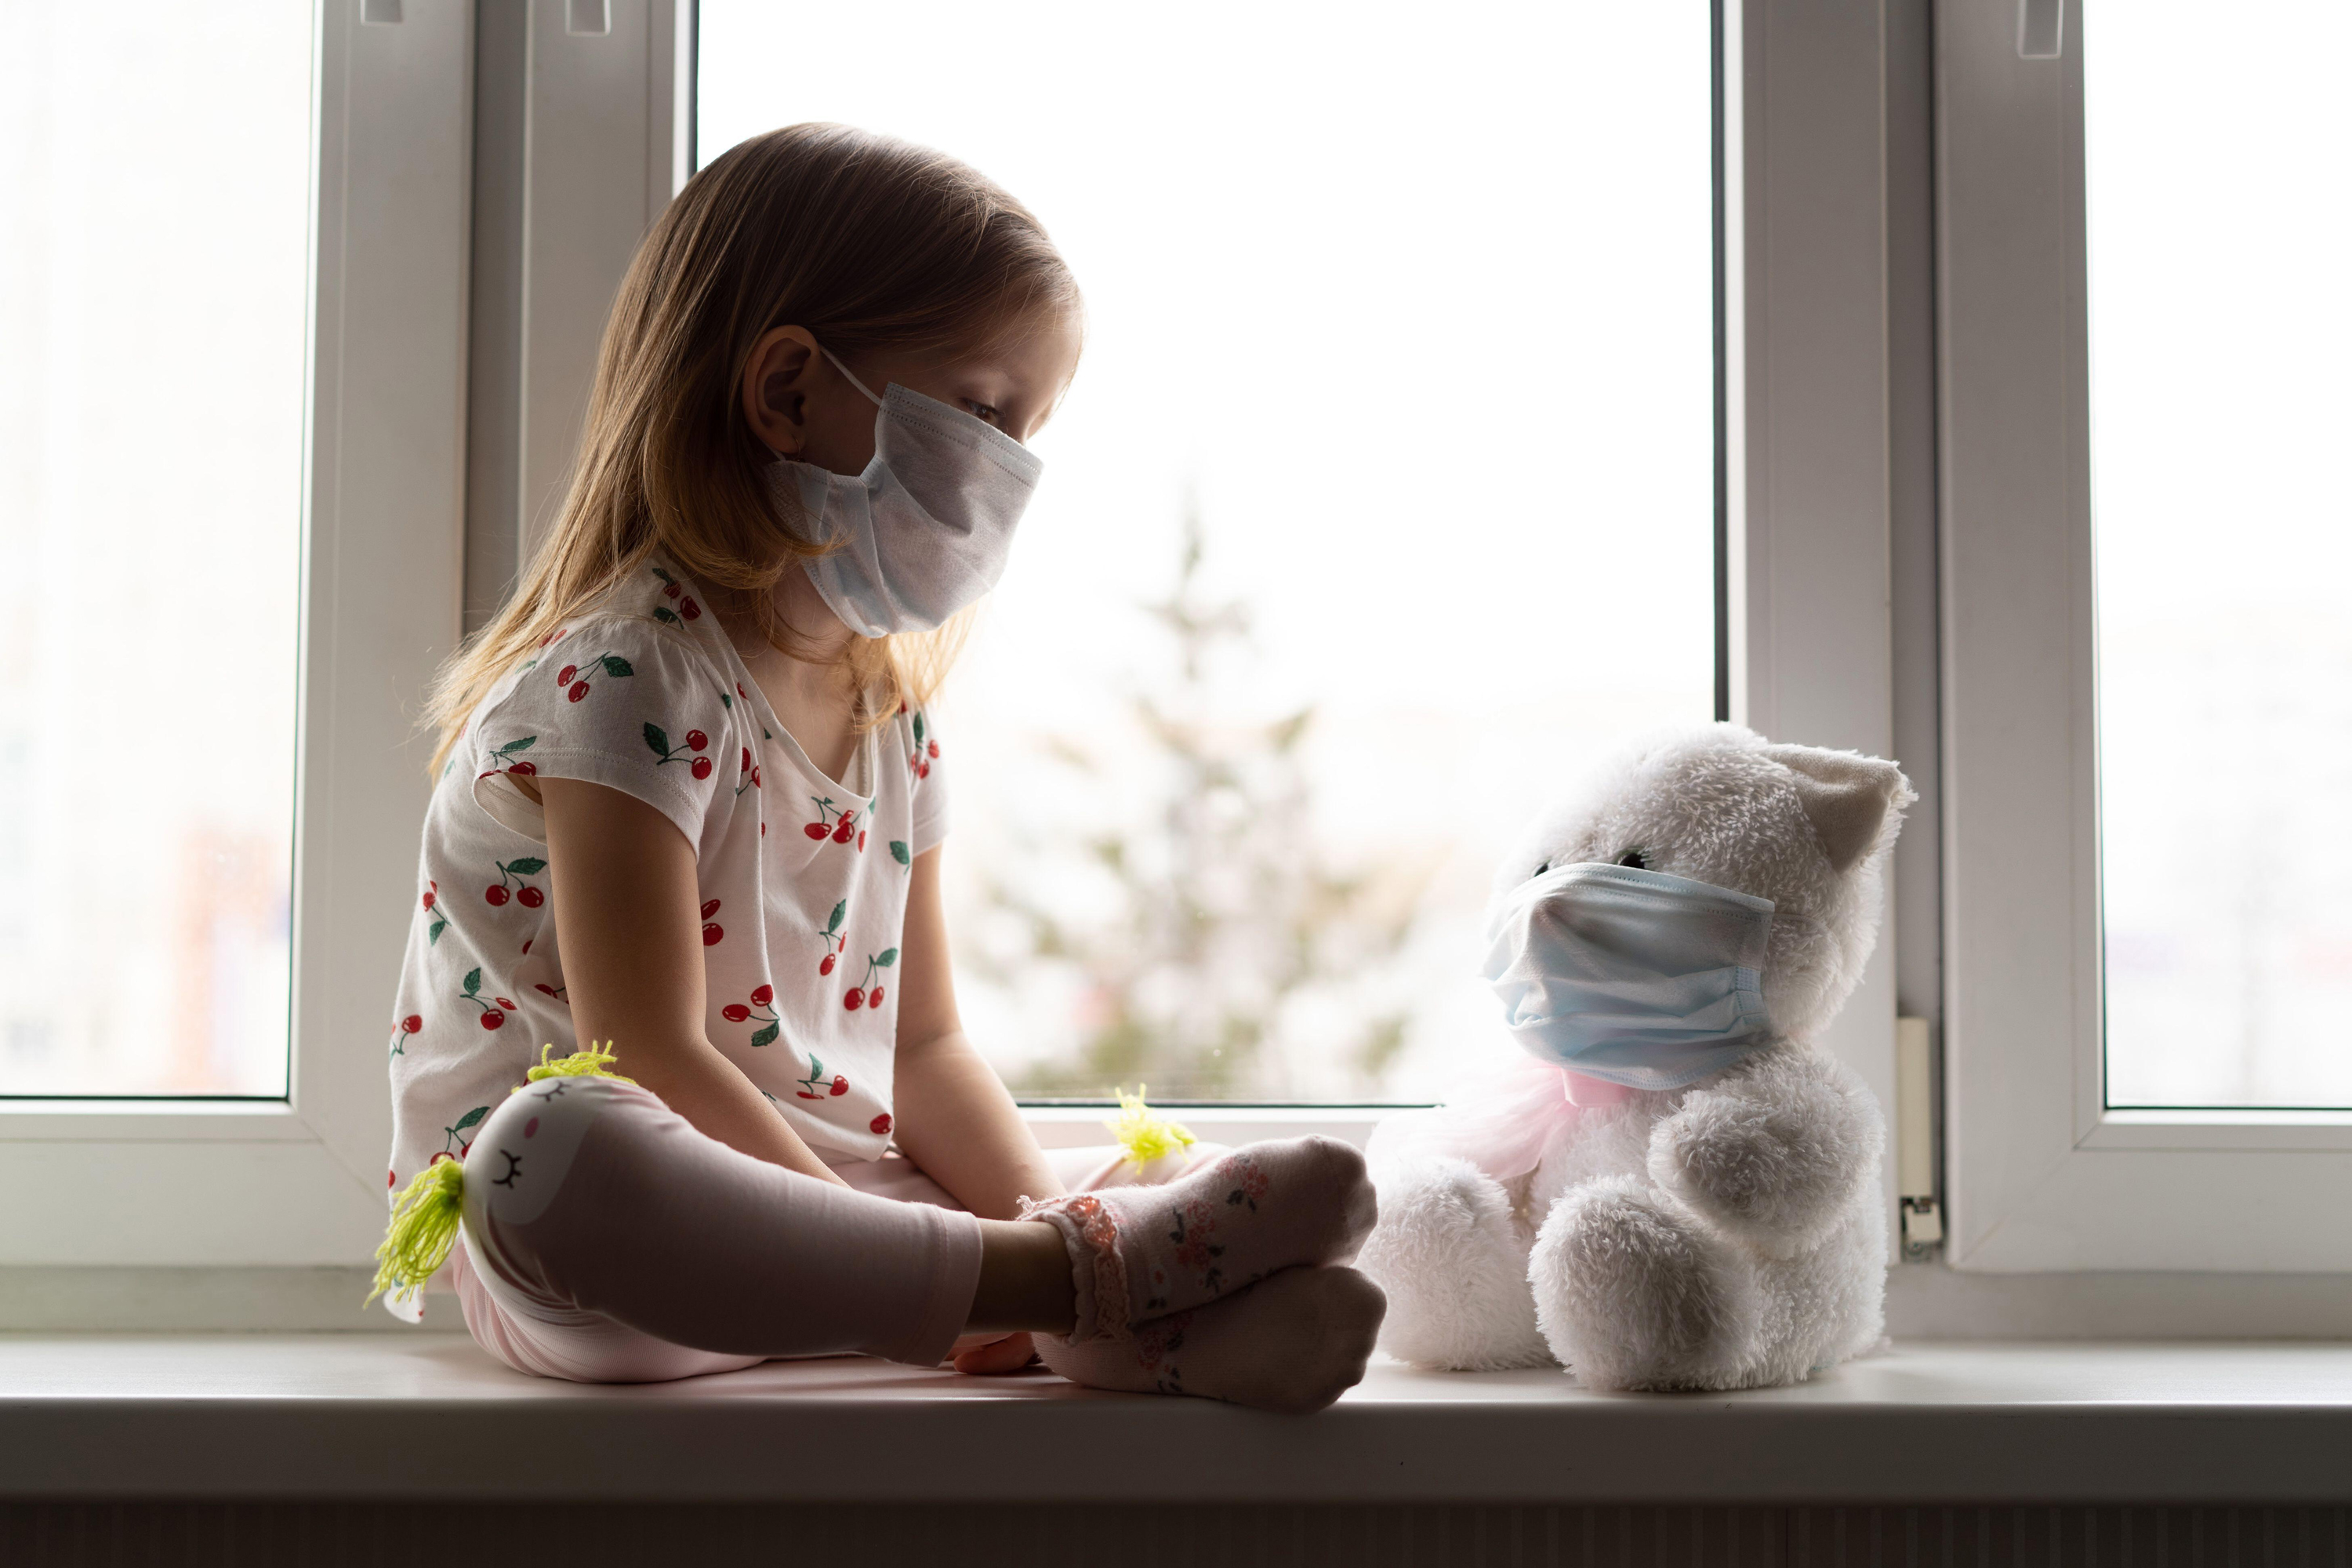 Child and teddy wearing face masks